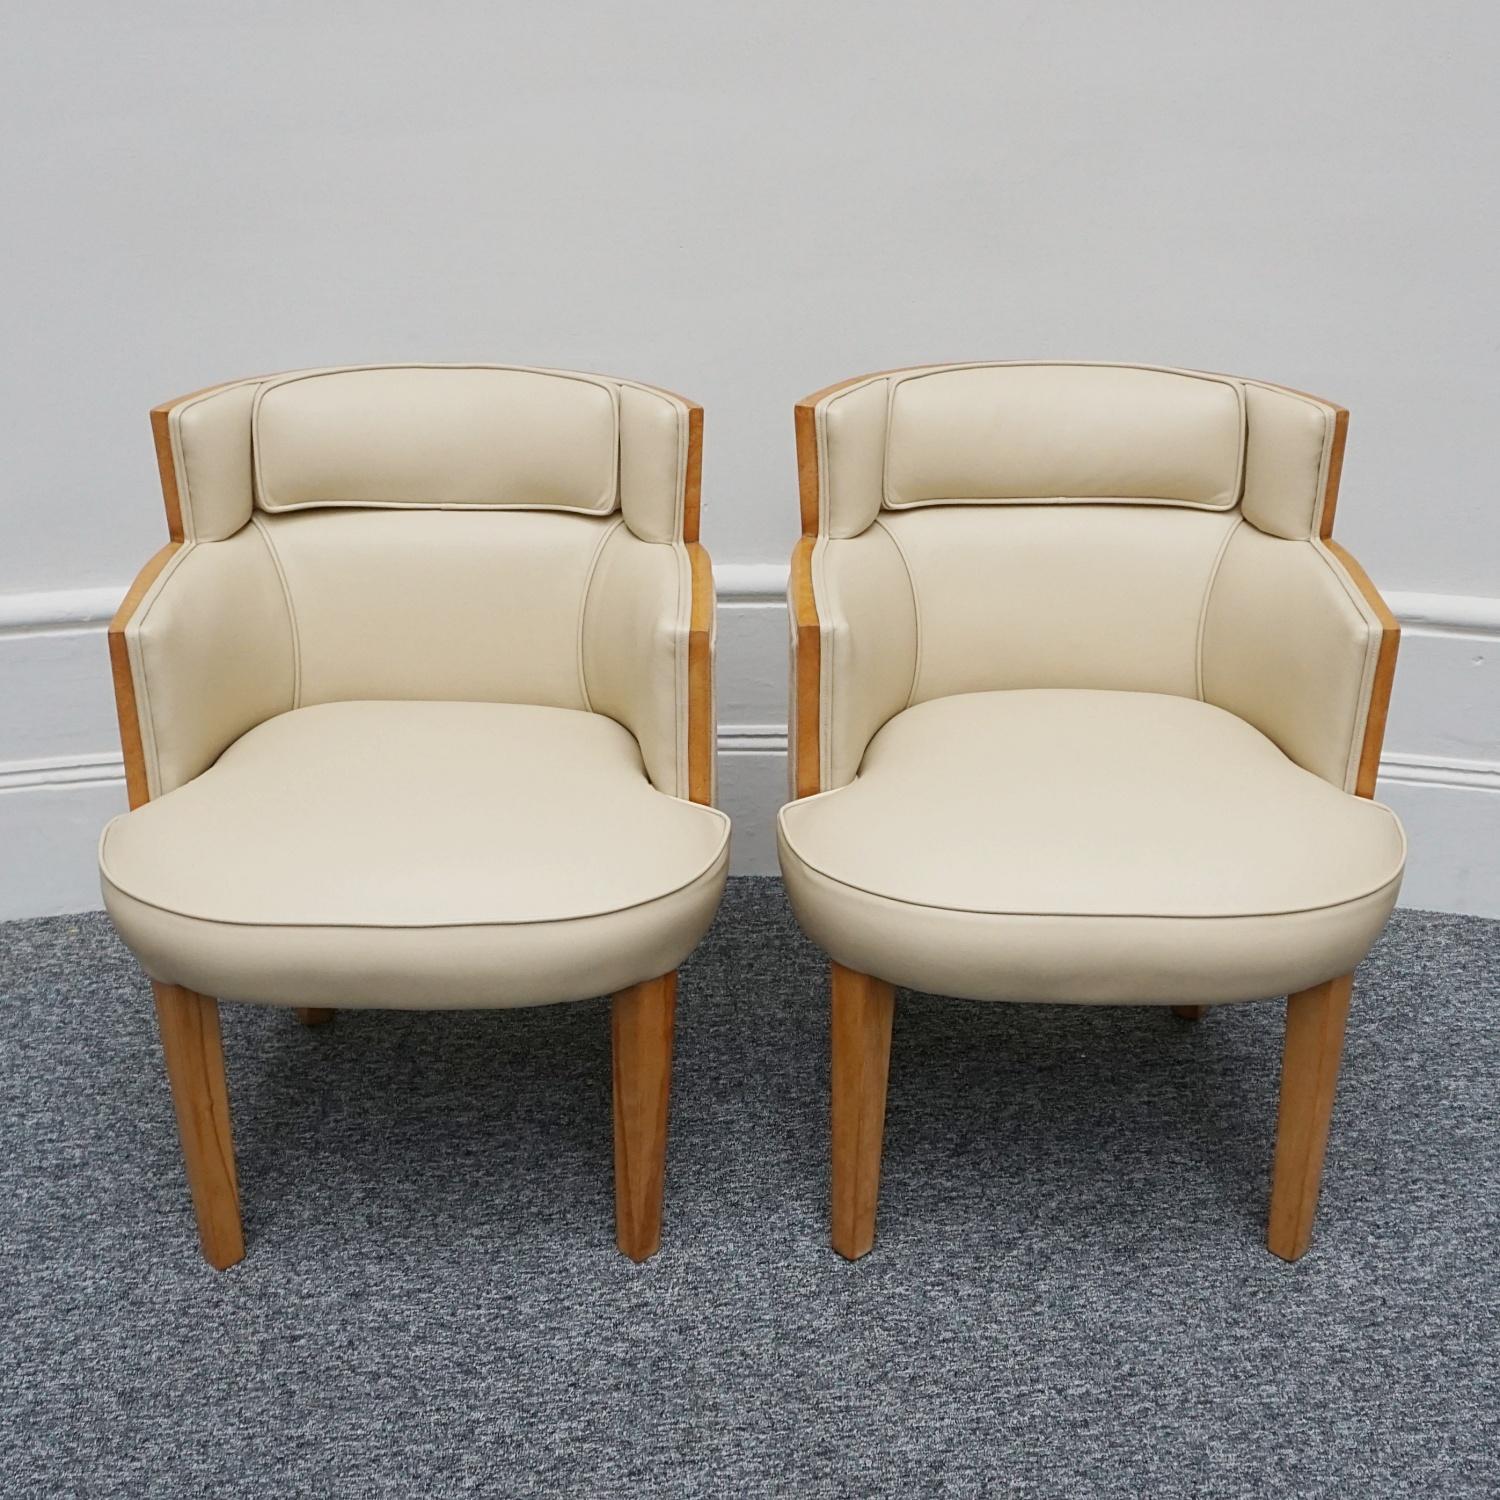 An Art Deco pair of Bankers chairs. Birdseye maple veneered with solid satin birch legs. Re-upholstered in cream leather and contrasting oatmeal faux suede. 

Dimensions: H 78cm W 59cm D 53cm Seat H 47cm W 45cm D 48cm 

Origin: English

Date: Circa